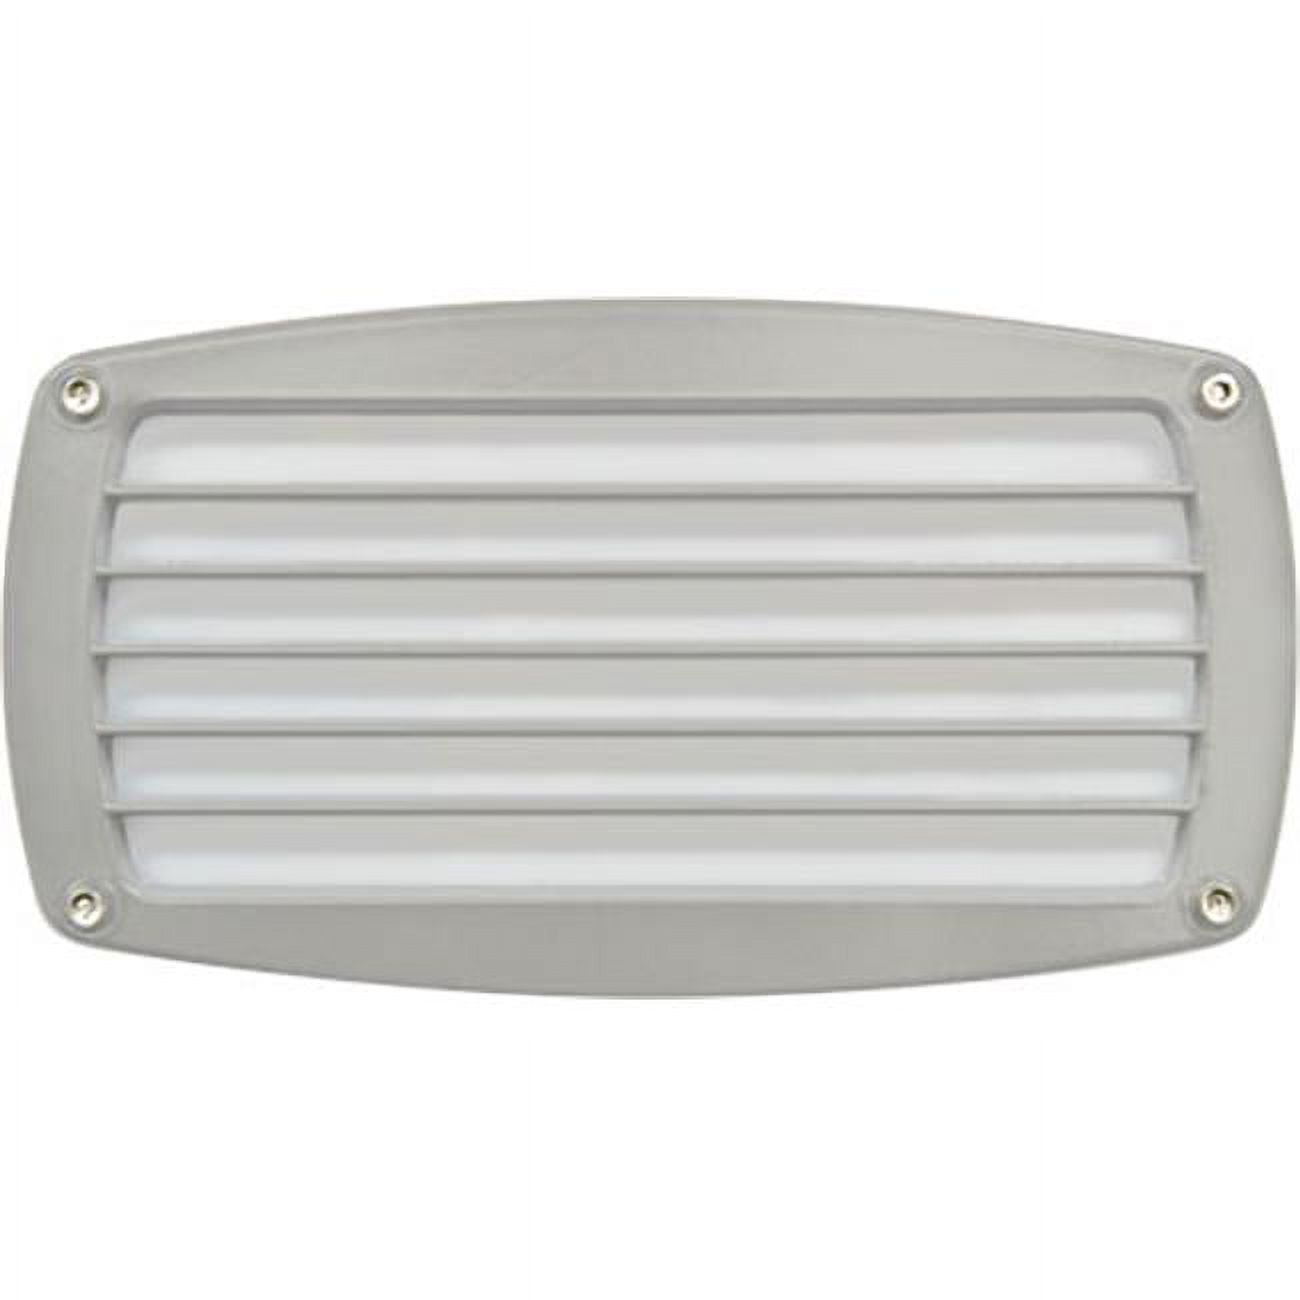 Picture of Dabmar Lighting DSL1015-W Recessed Louvered Brick, Step & Wall Light, White - 5 x 9 x 3.75 in.